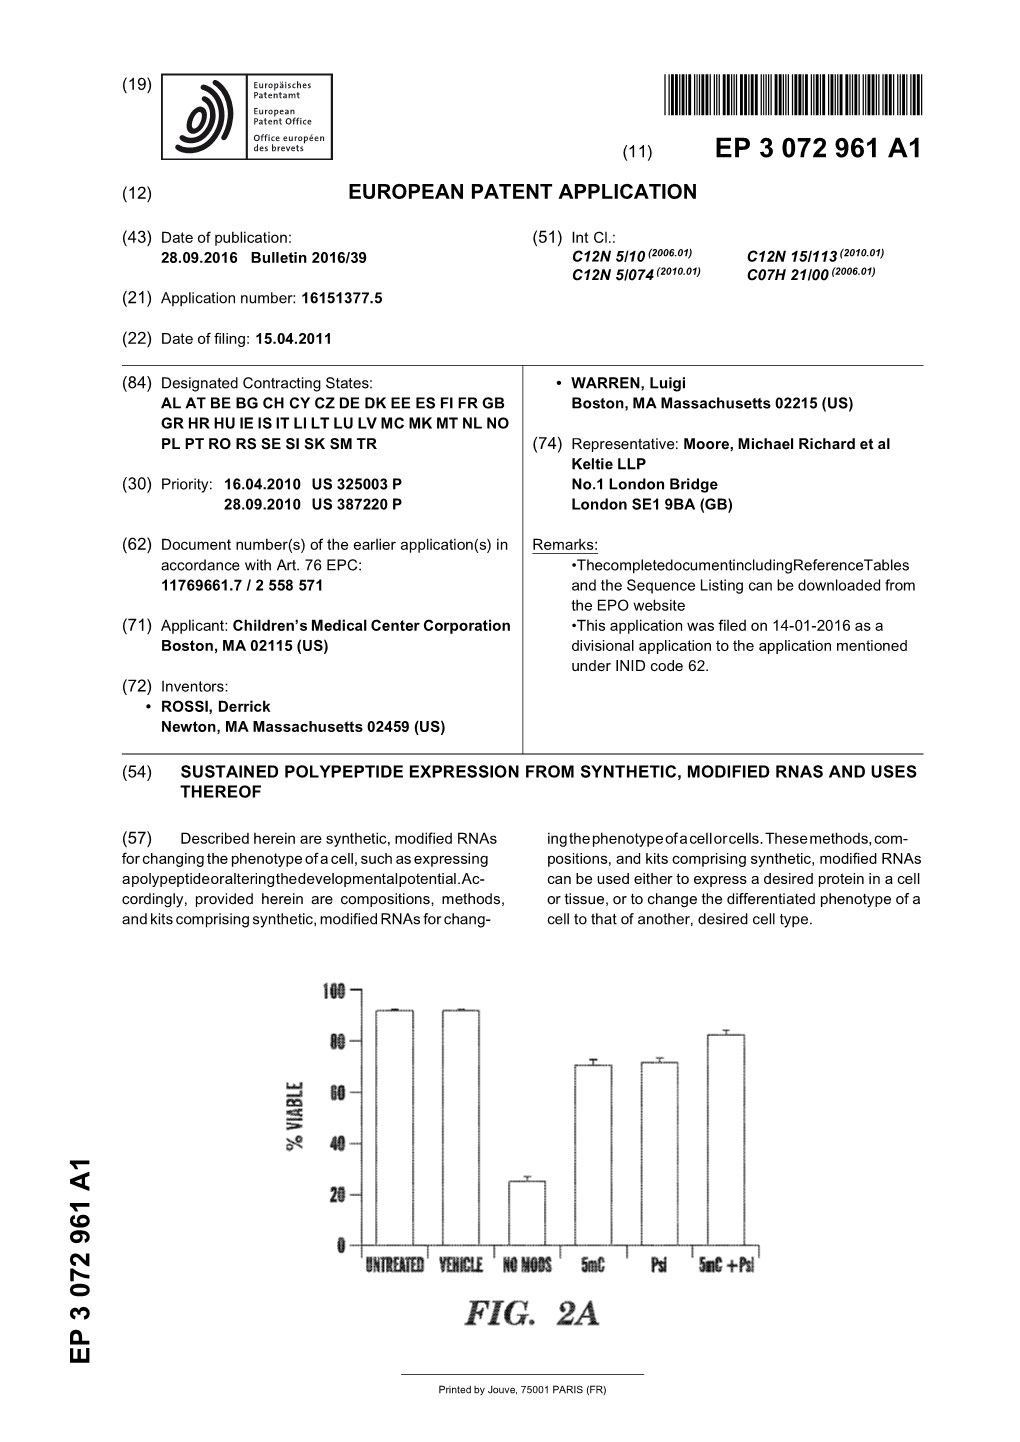 Sustained Polypeptide Expression from Synthetic, Modified Rnas and Uses Thereof